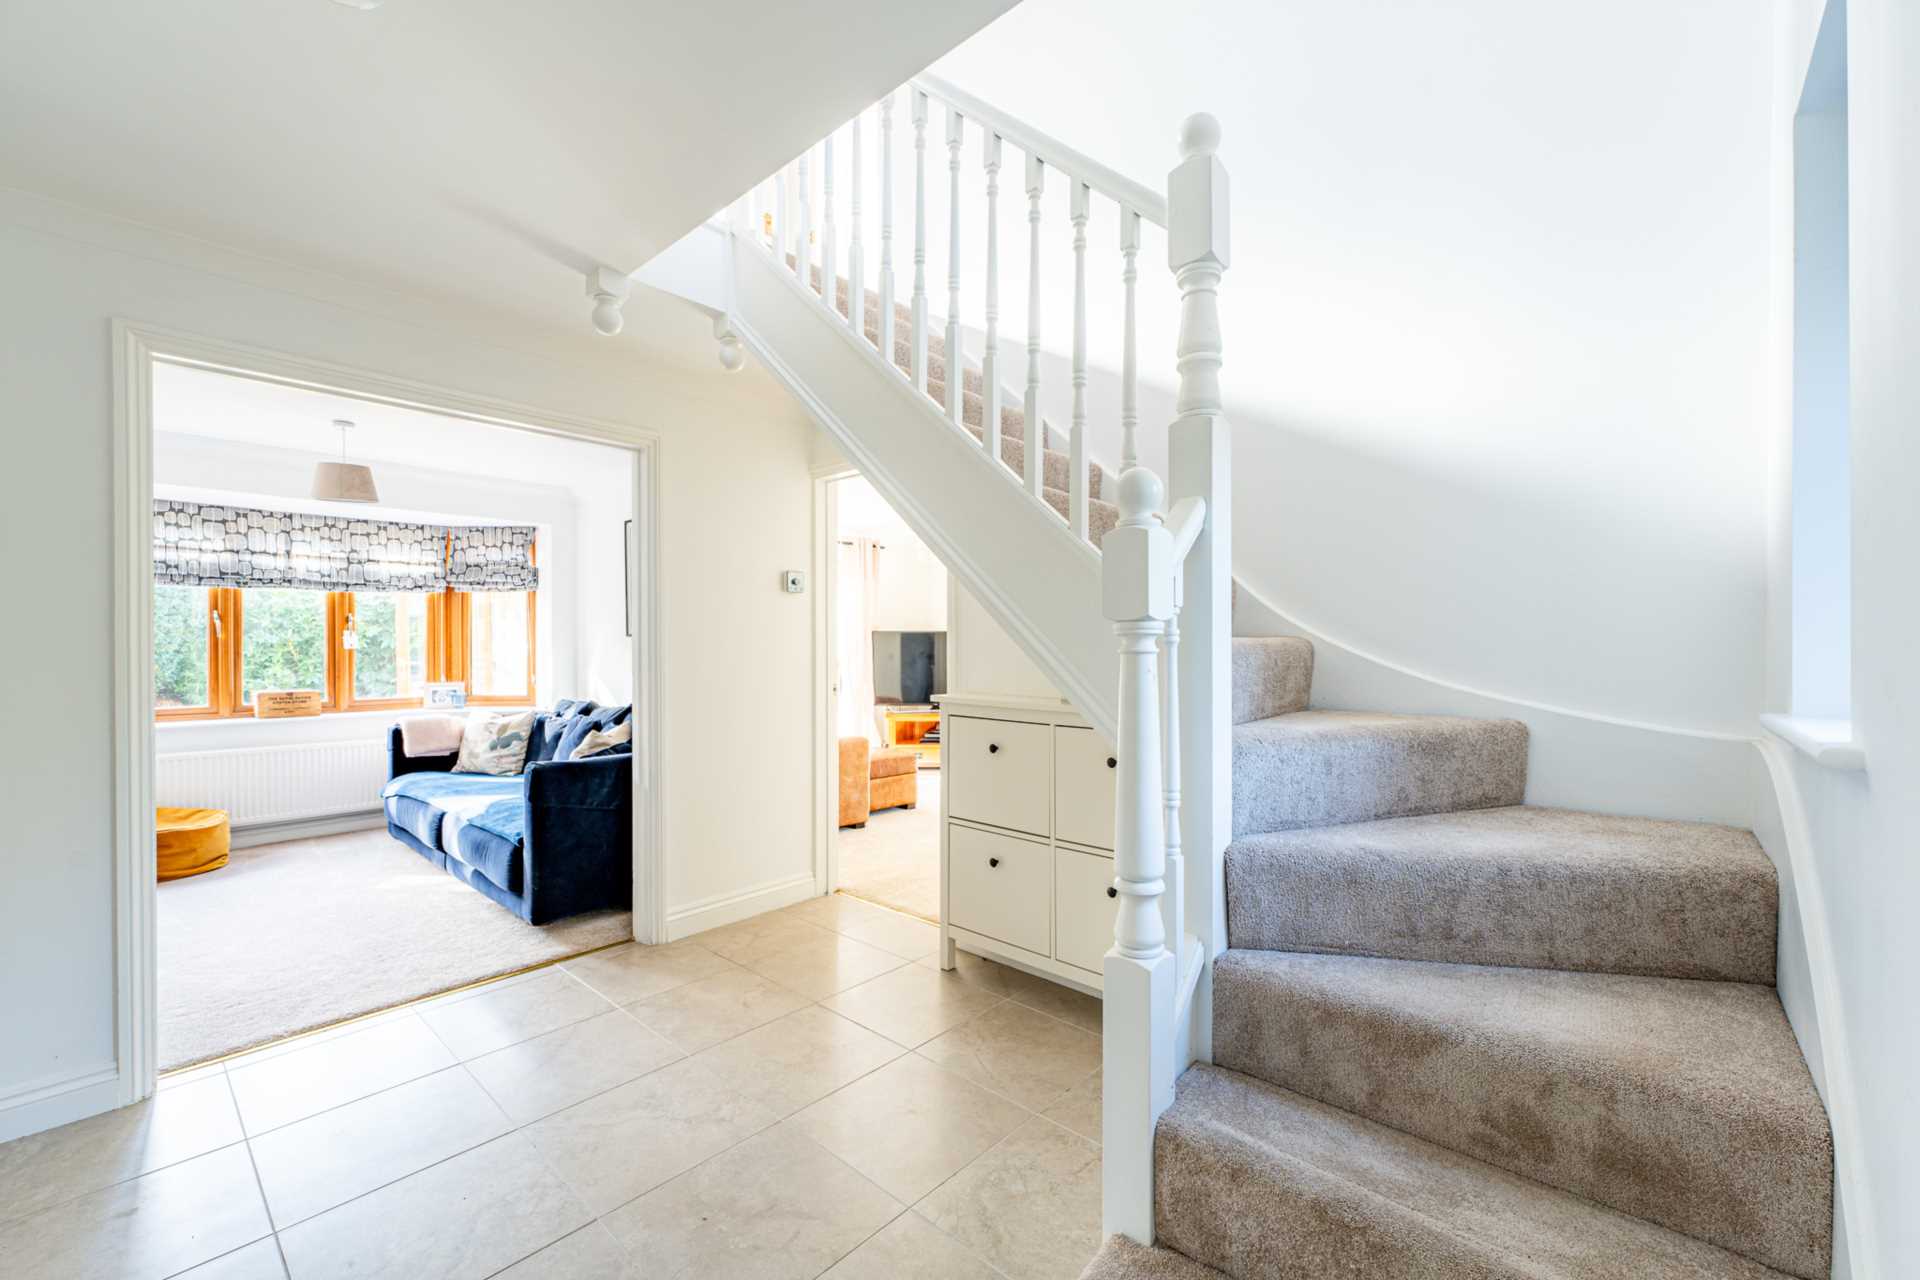 Market Avenue - Stunning Detached Family Home, Image 2